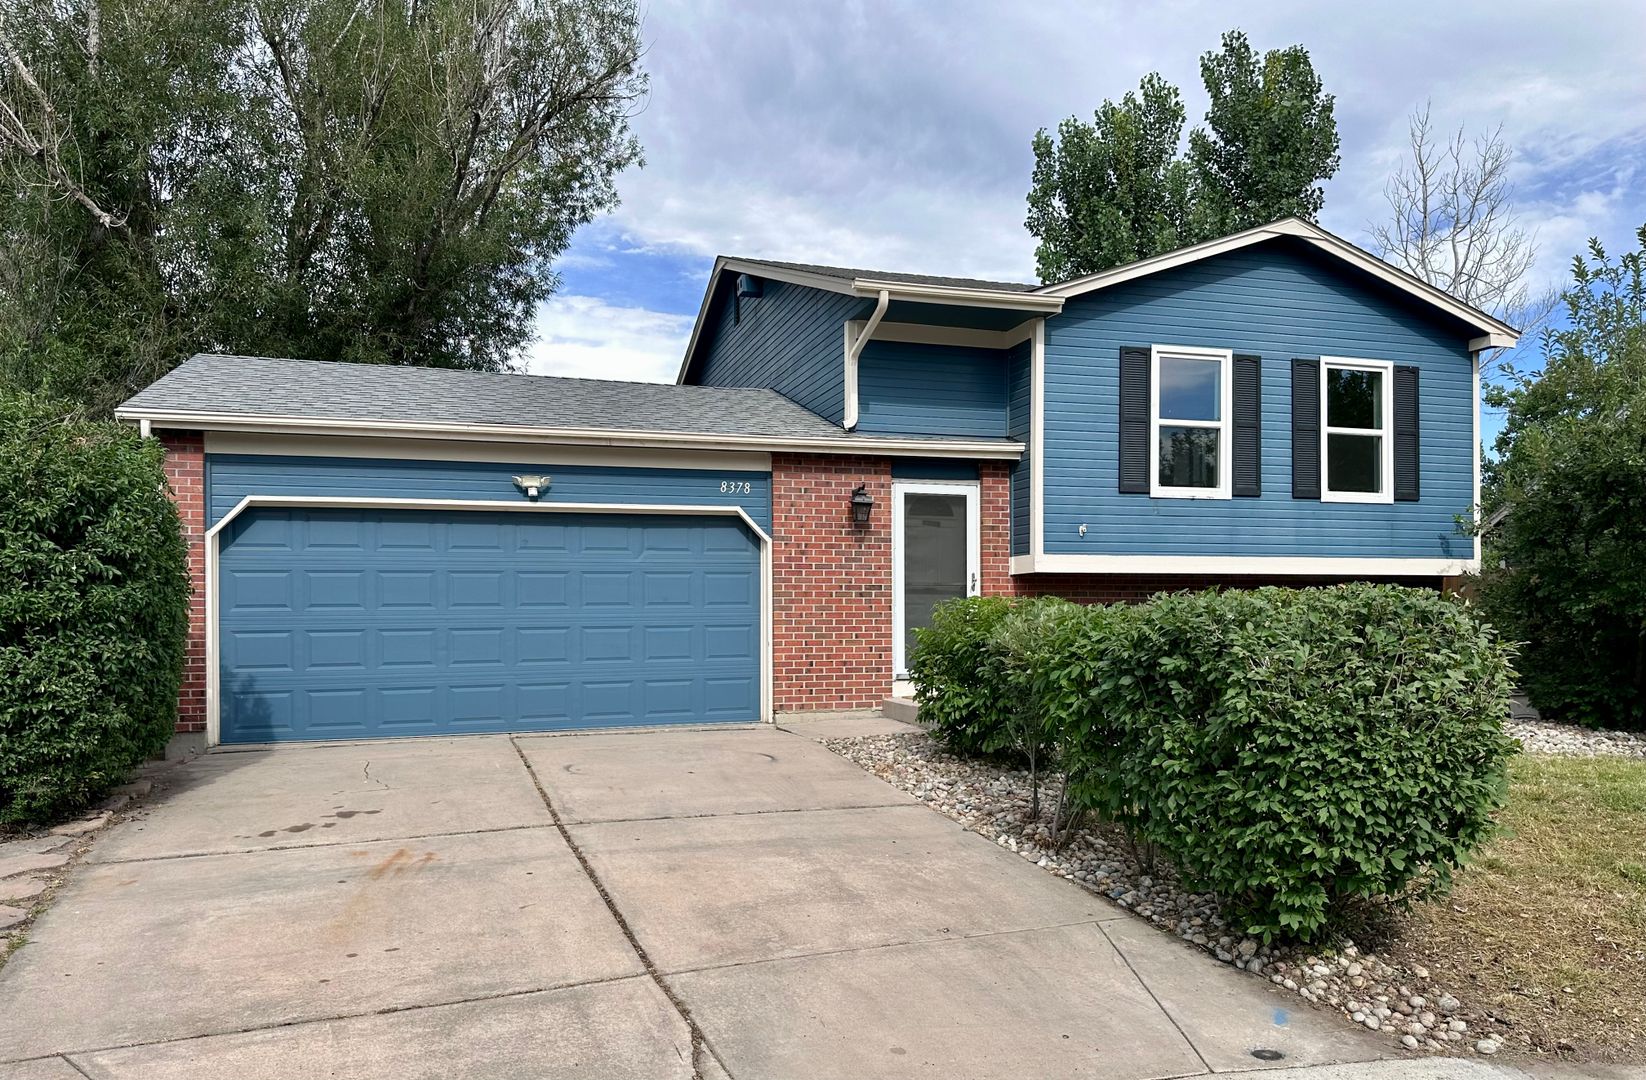 Well Maintained Split Level Home in Cottonwood Featuring 3 Bedrooms/2 Bathrooms.  Large Peaceful Backyard!  Stunning, Custom Kitchen!  Minutes to E470, Parker Road, Parker Adventist Hosp and Much More!